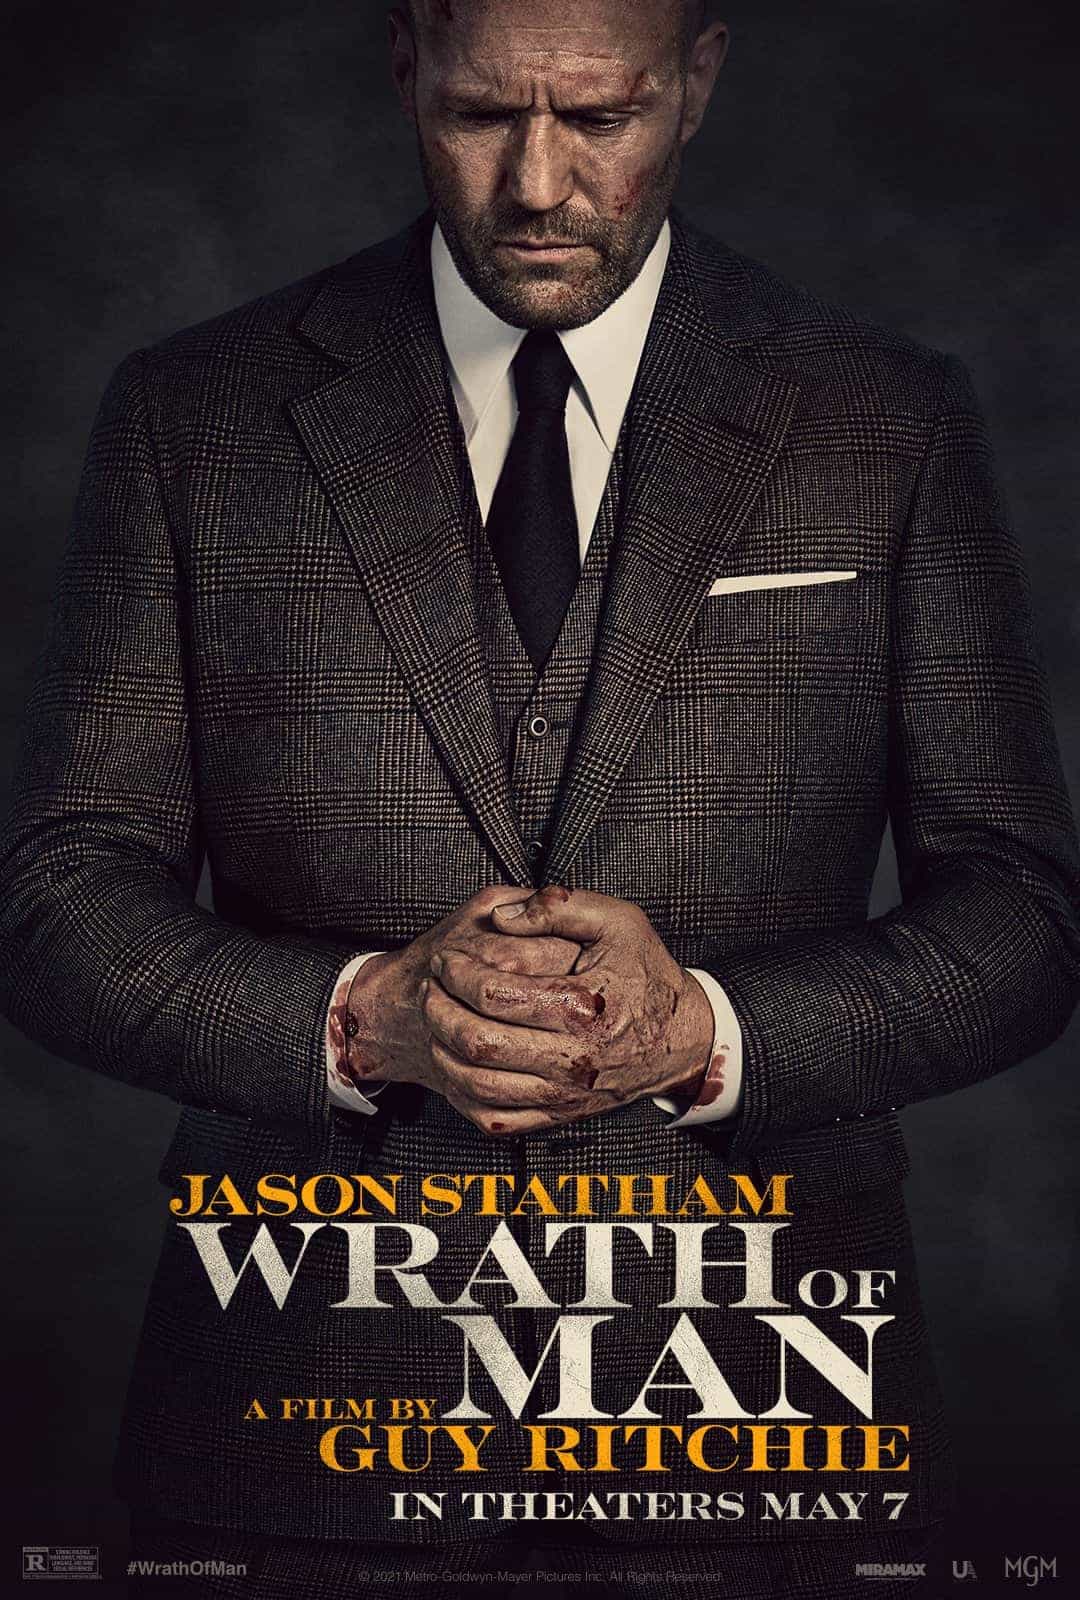 Jason Statham plays it cool in the new trailer for Director Guy Ritchies Wrath Of Man